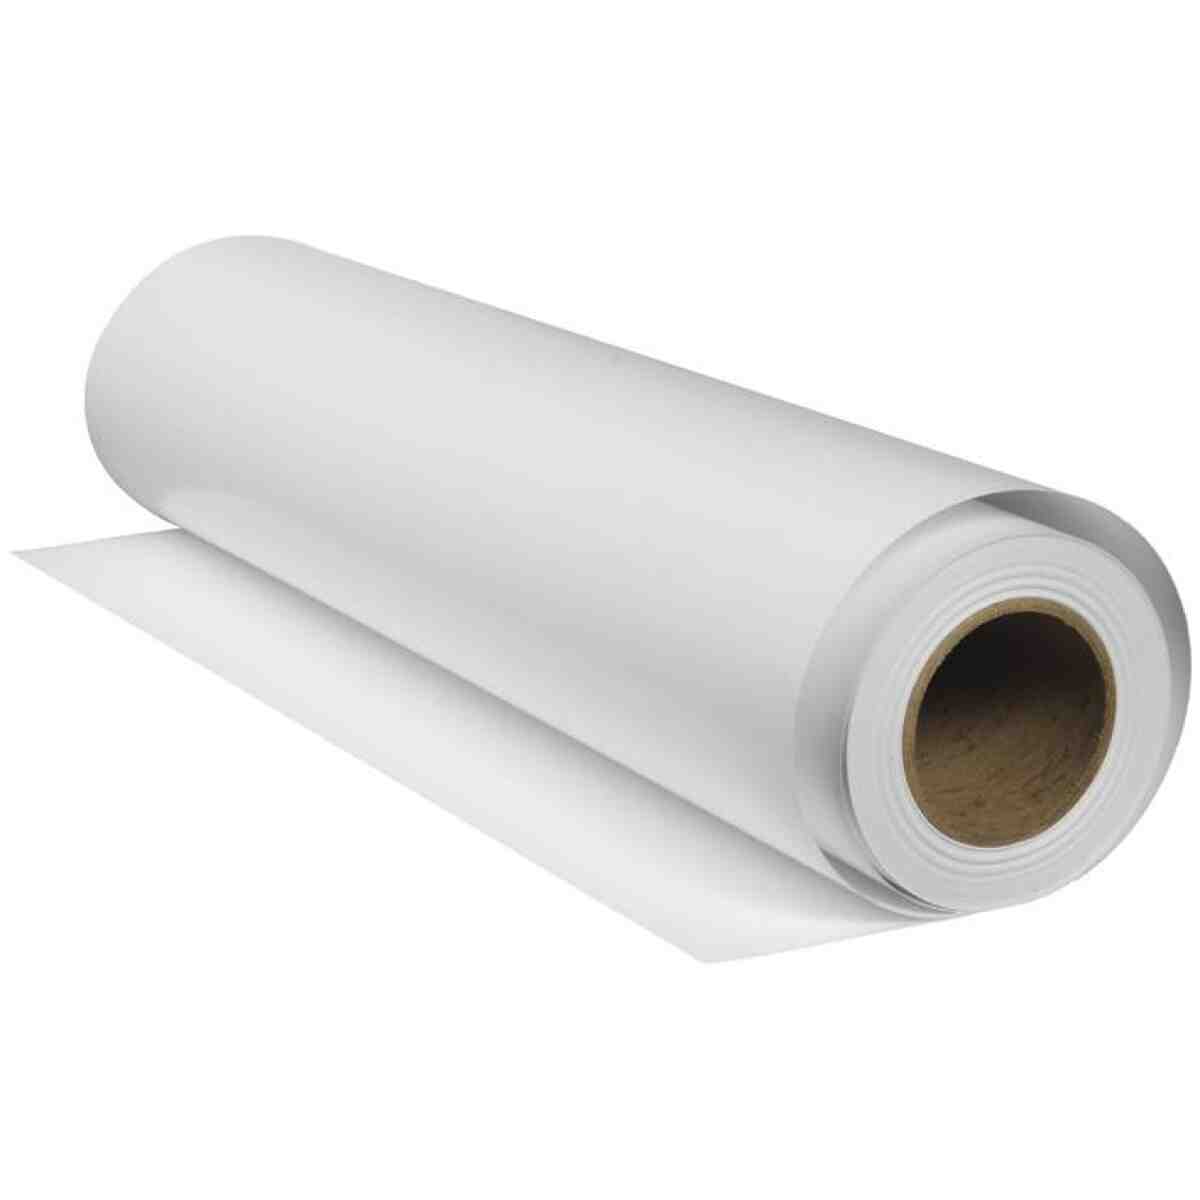 Direct To Film (DTF) Hot Peel Transfer Film 24" by 328' TOTAL INK SOLUTIONS®